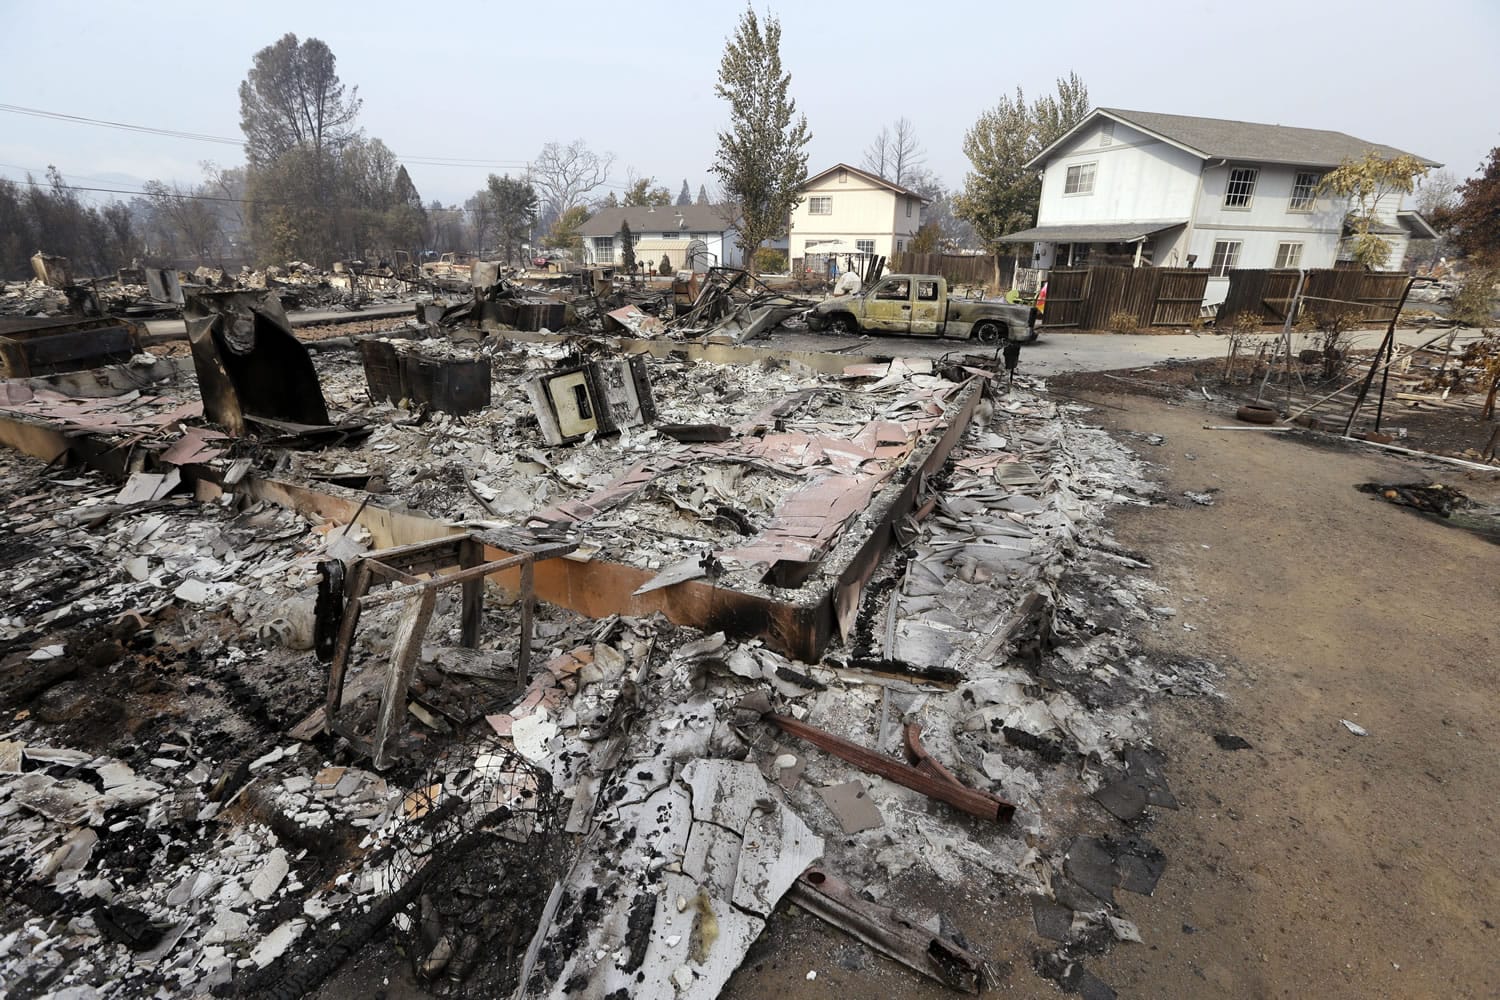 Houses remain standing and with little damage in view of others that were destroyed in a wildfire several days earlier, Tuesday, Sept. 15, 2015, in Middletown, Calif. The fire that sped through Middletown and other parts of rural Lake County, less than 100 miles north of San Francisco, has continued to burn since Saturday despite a massive firefighting effort.